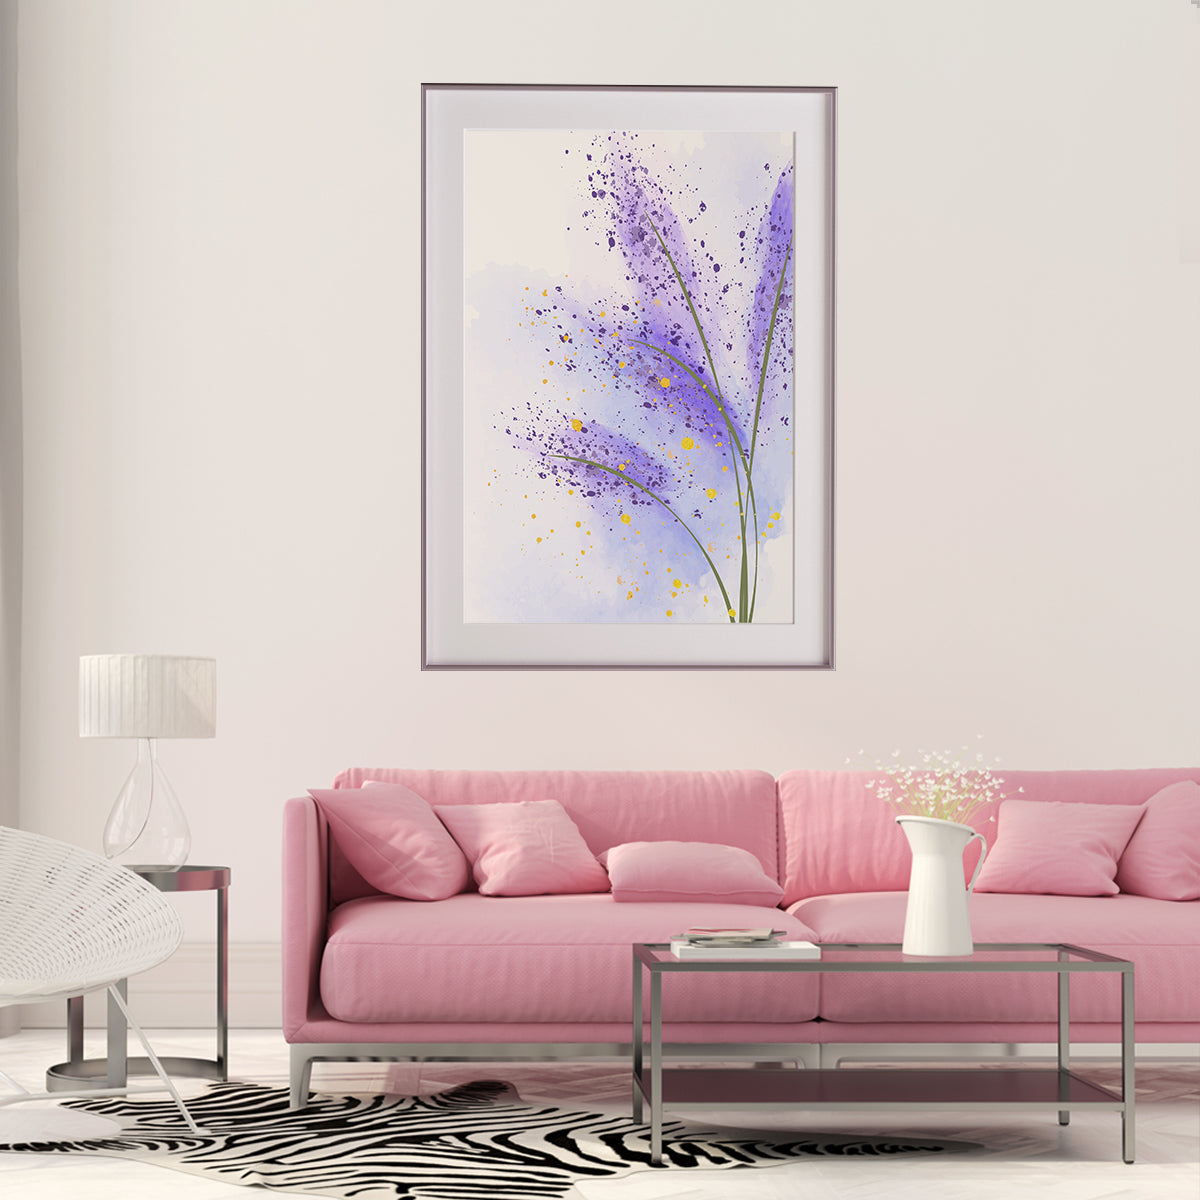 Abstract Lavender Minimalist Famous Modern Art Prints-Vertical Posters NOT FRAMED-CetArt-8″x10″ inches-CetArt